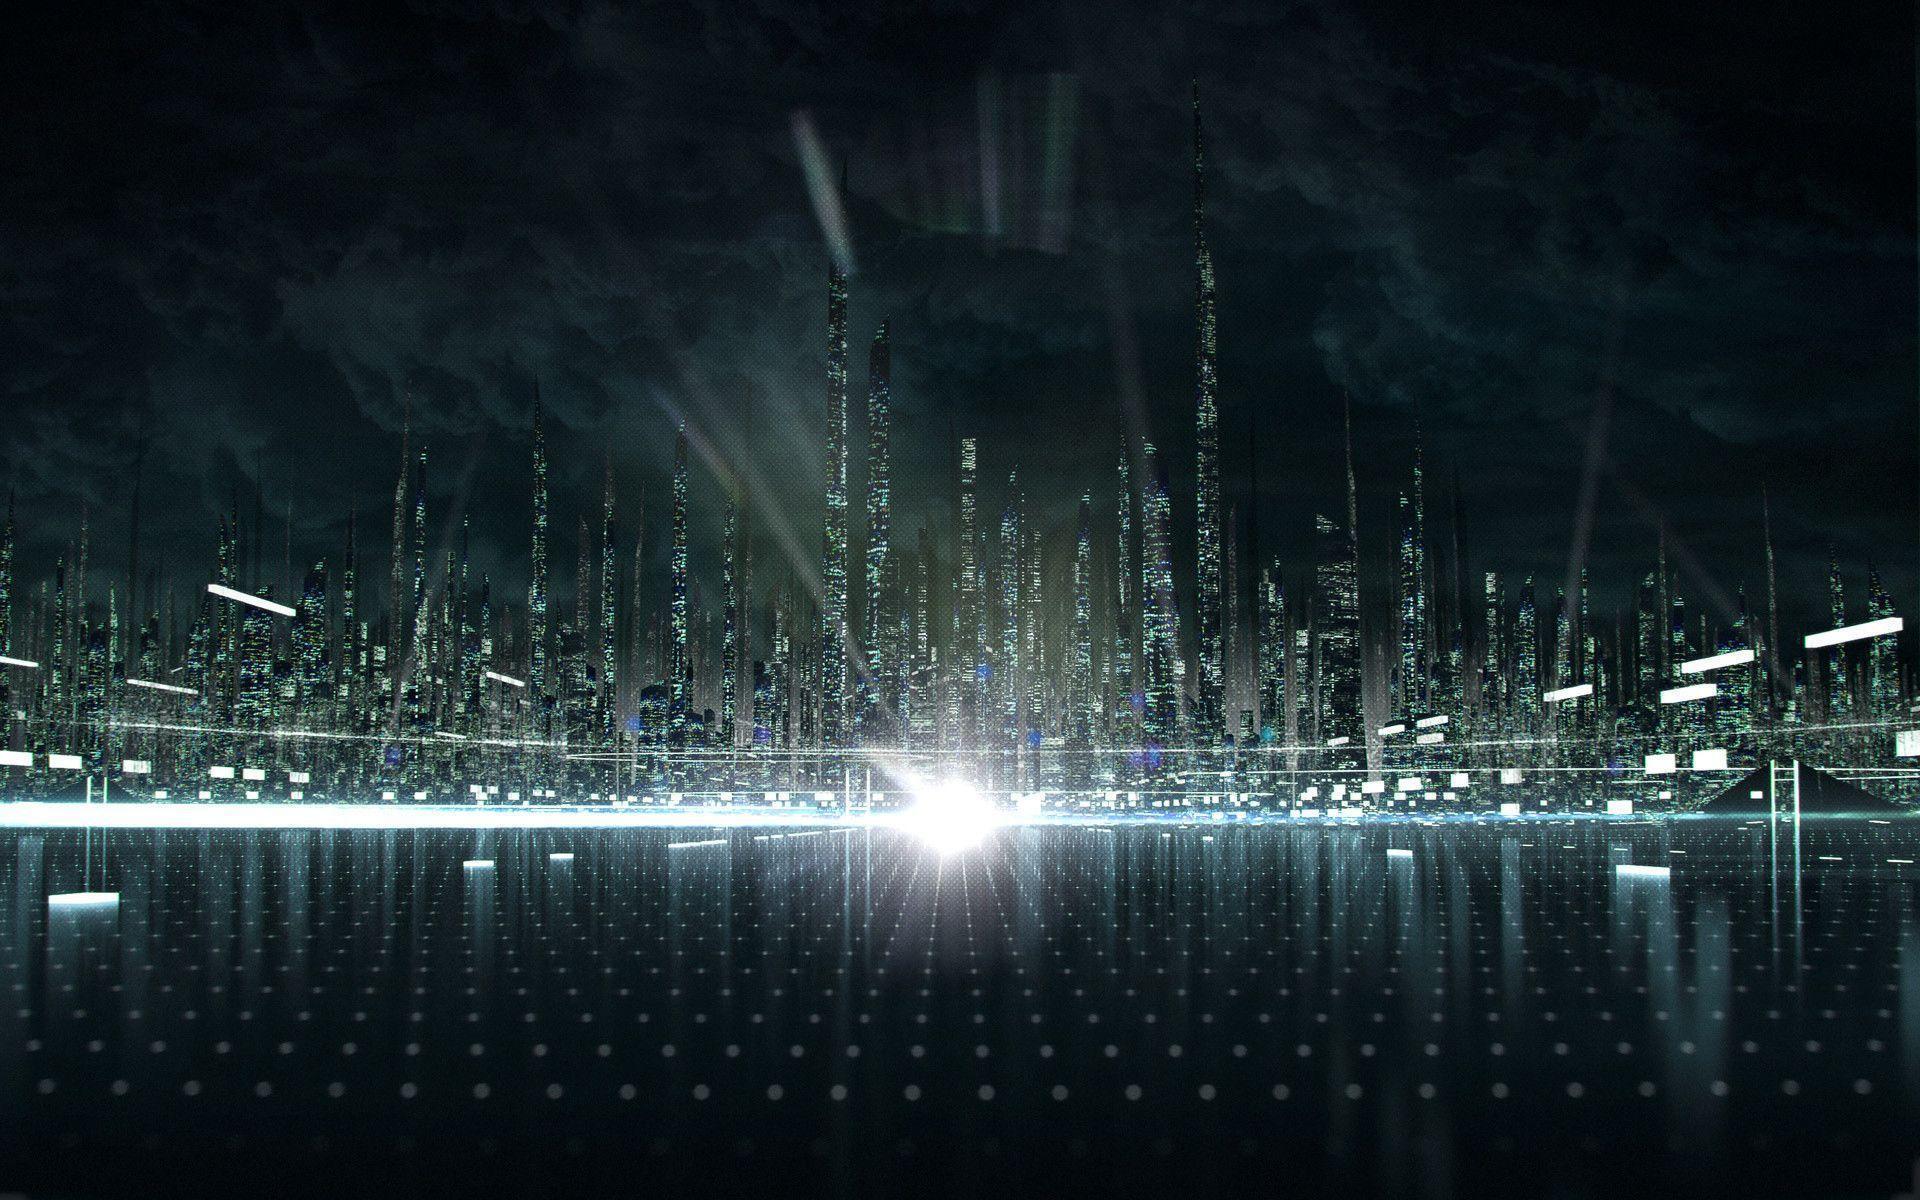 Tron: Legacy Backgrounds - Wallpaper Cave